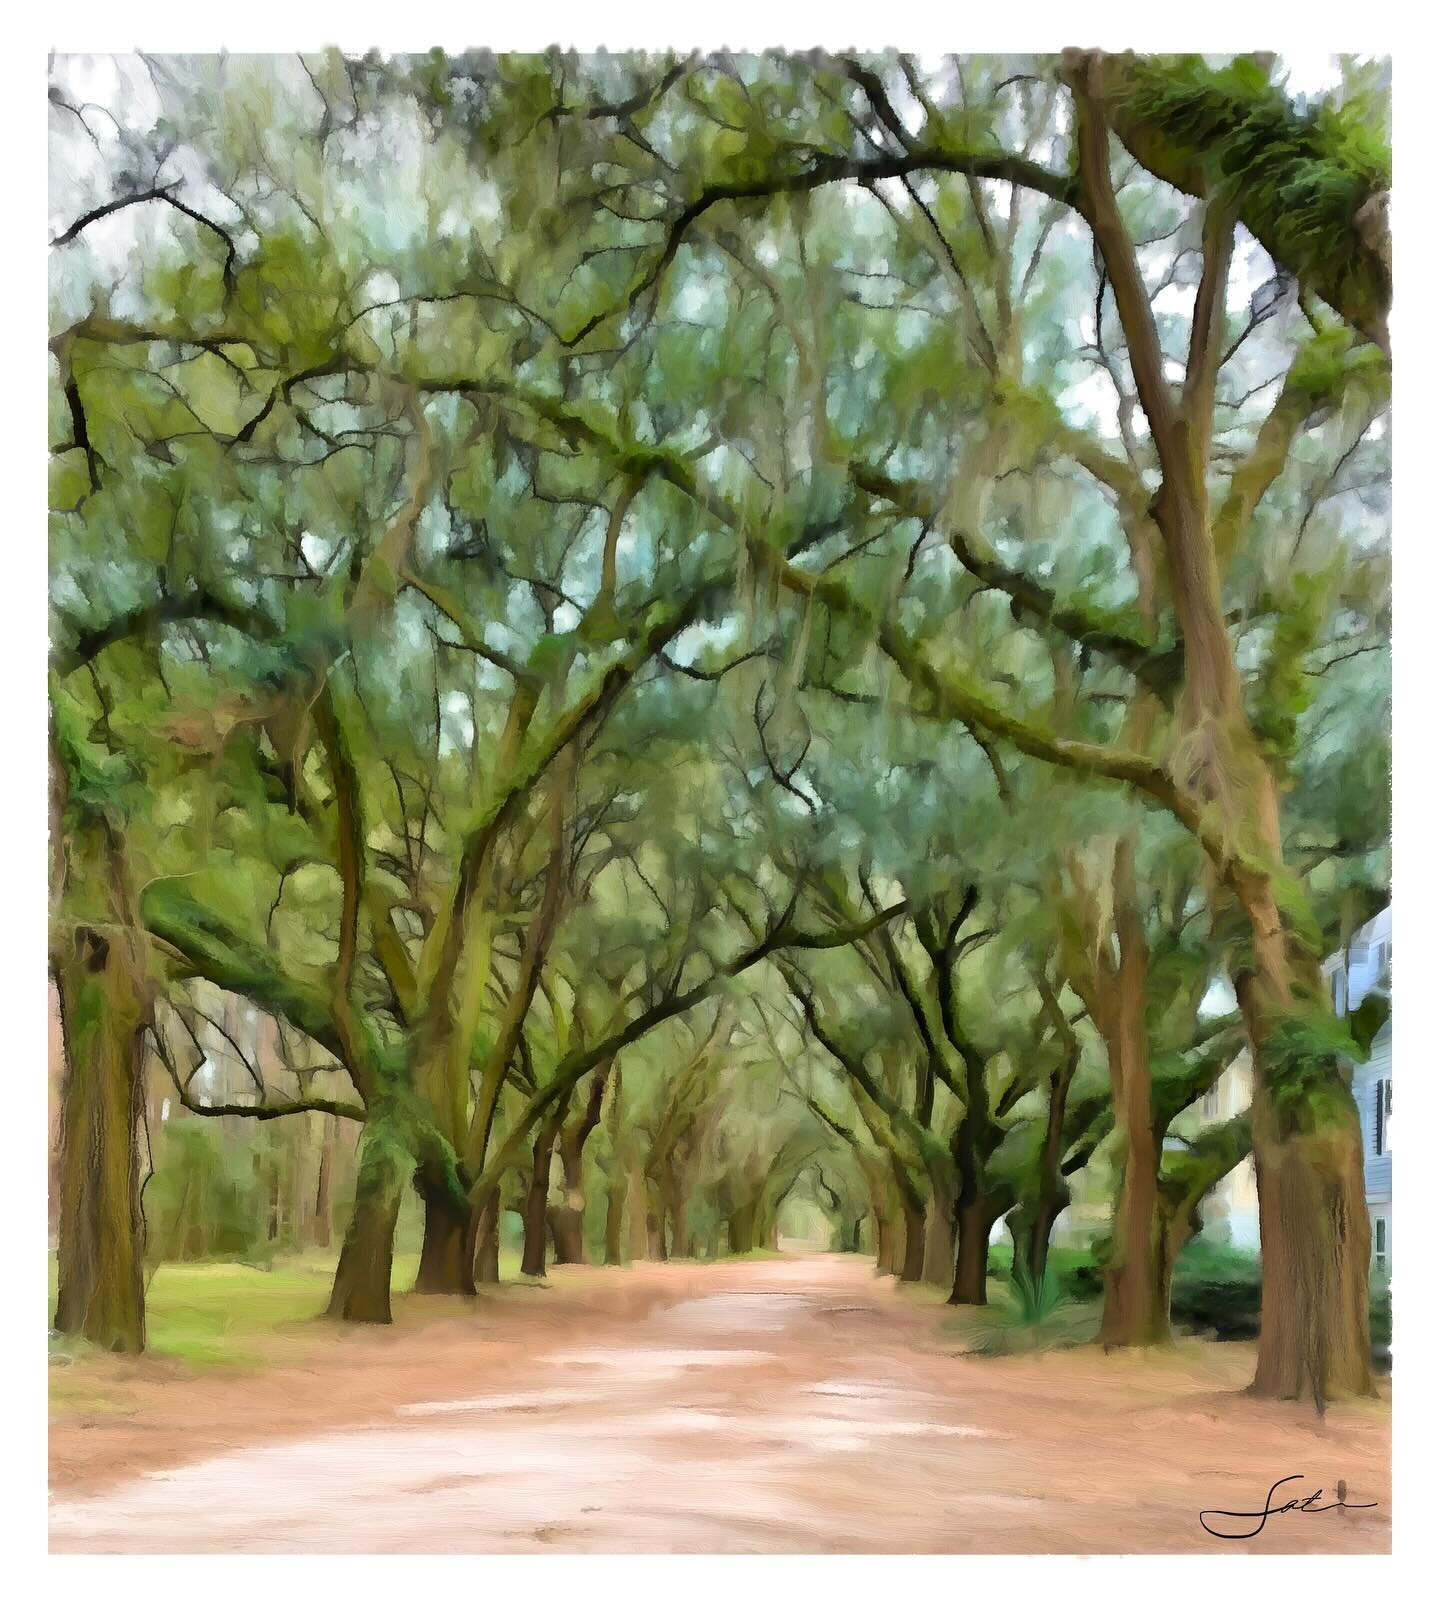 Taking a stroll in #Charleston - this piece is called &ldquo;holding hands&rdquo; as suggested by the trees.